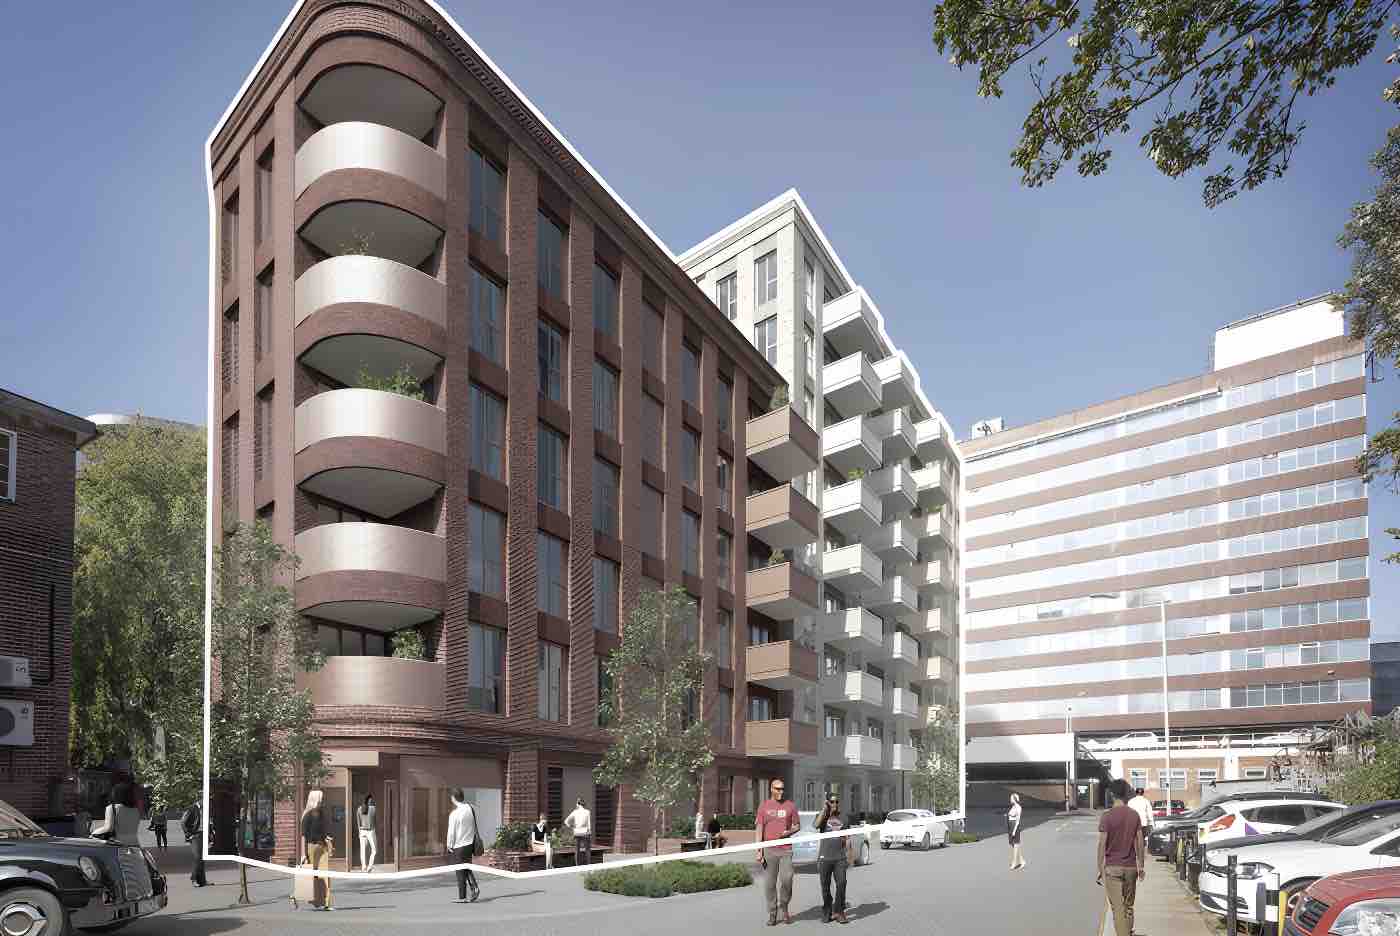 A substantial mixed-use scheme for Romford, RM1